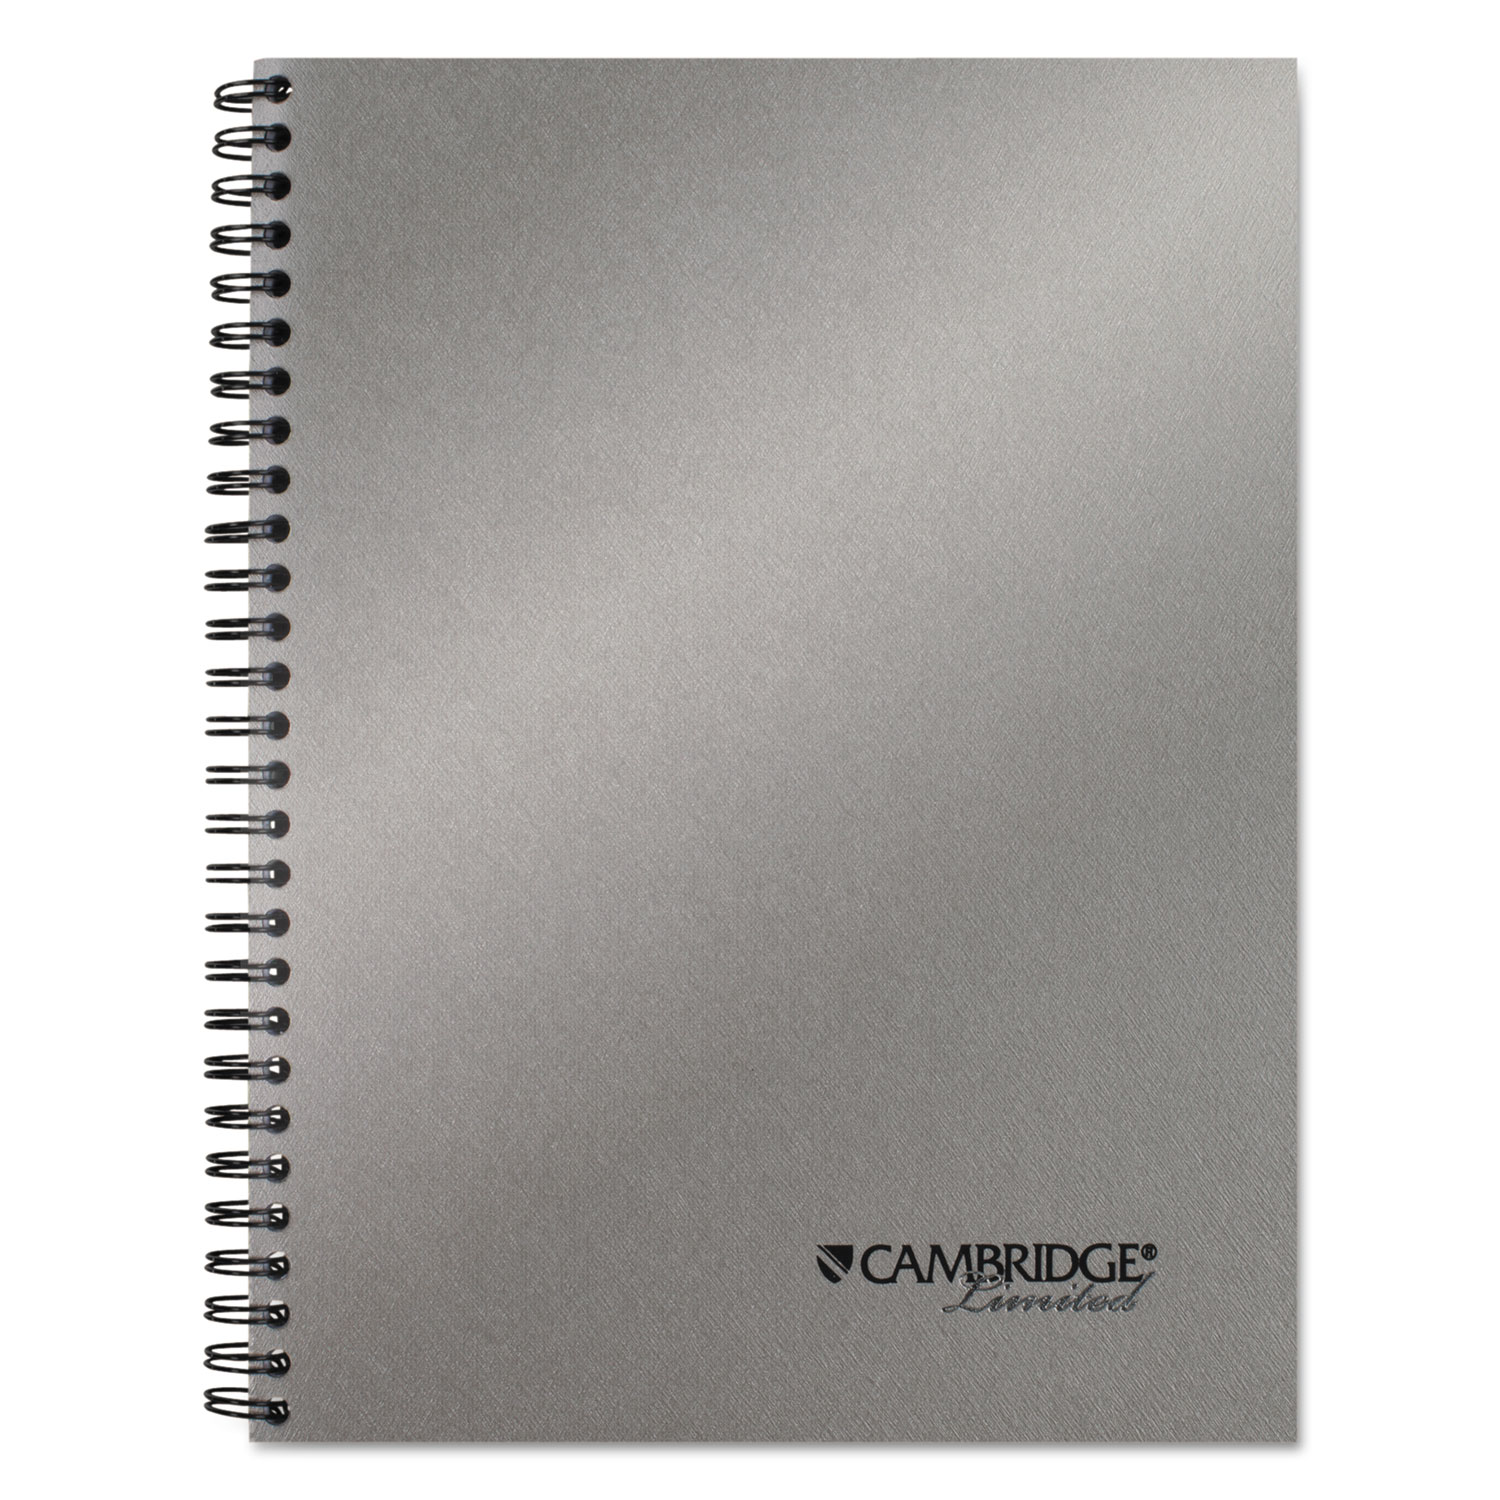  Cambridge 4500730 Wirebound Notebook, Wide/Legal Rule, Metallic Silver Cover, 9.5 x 7.5, 80 Sheets (MEA45007) 